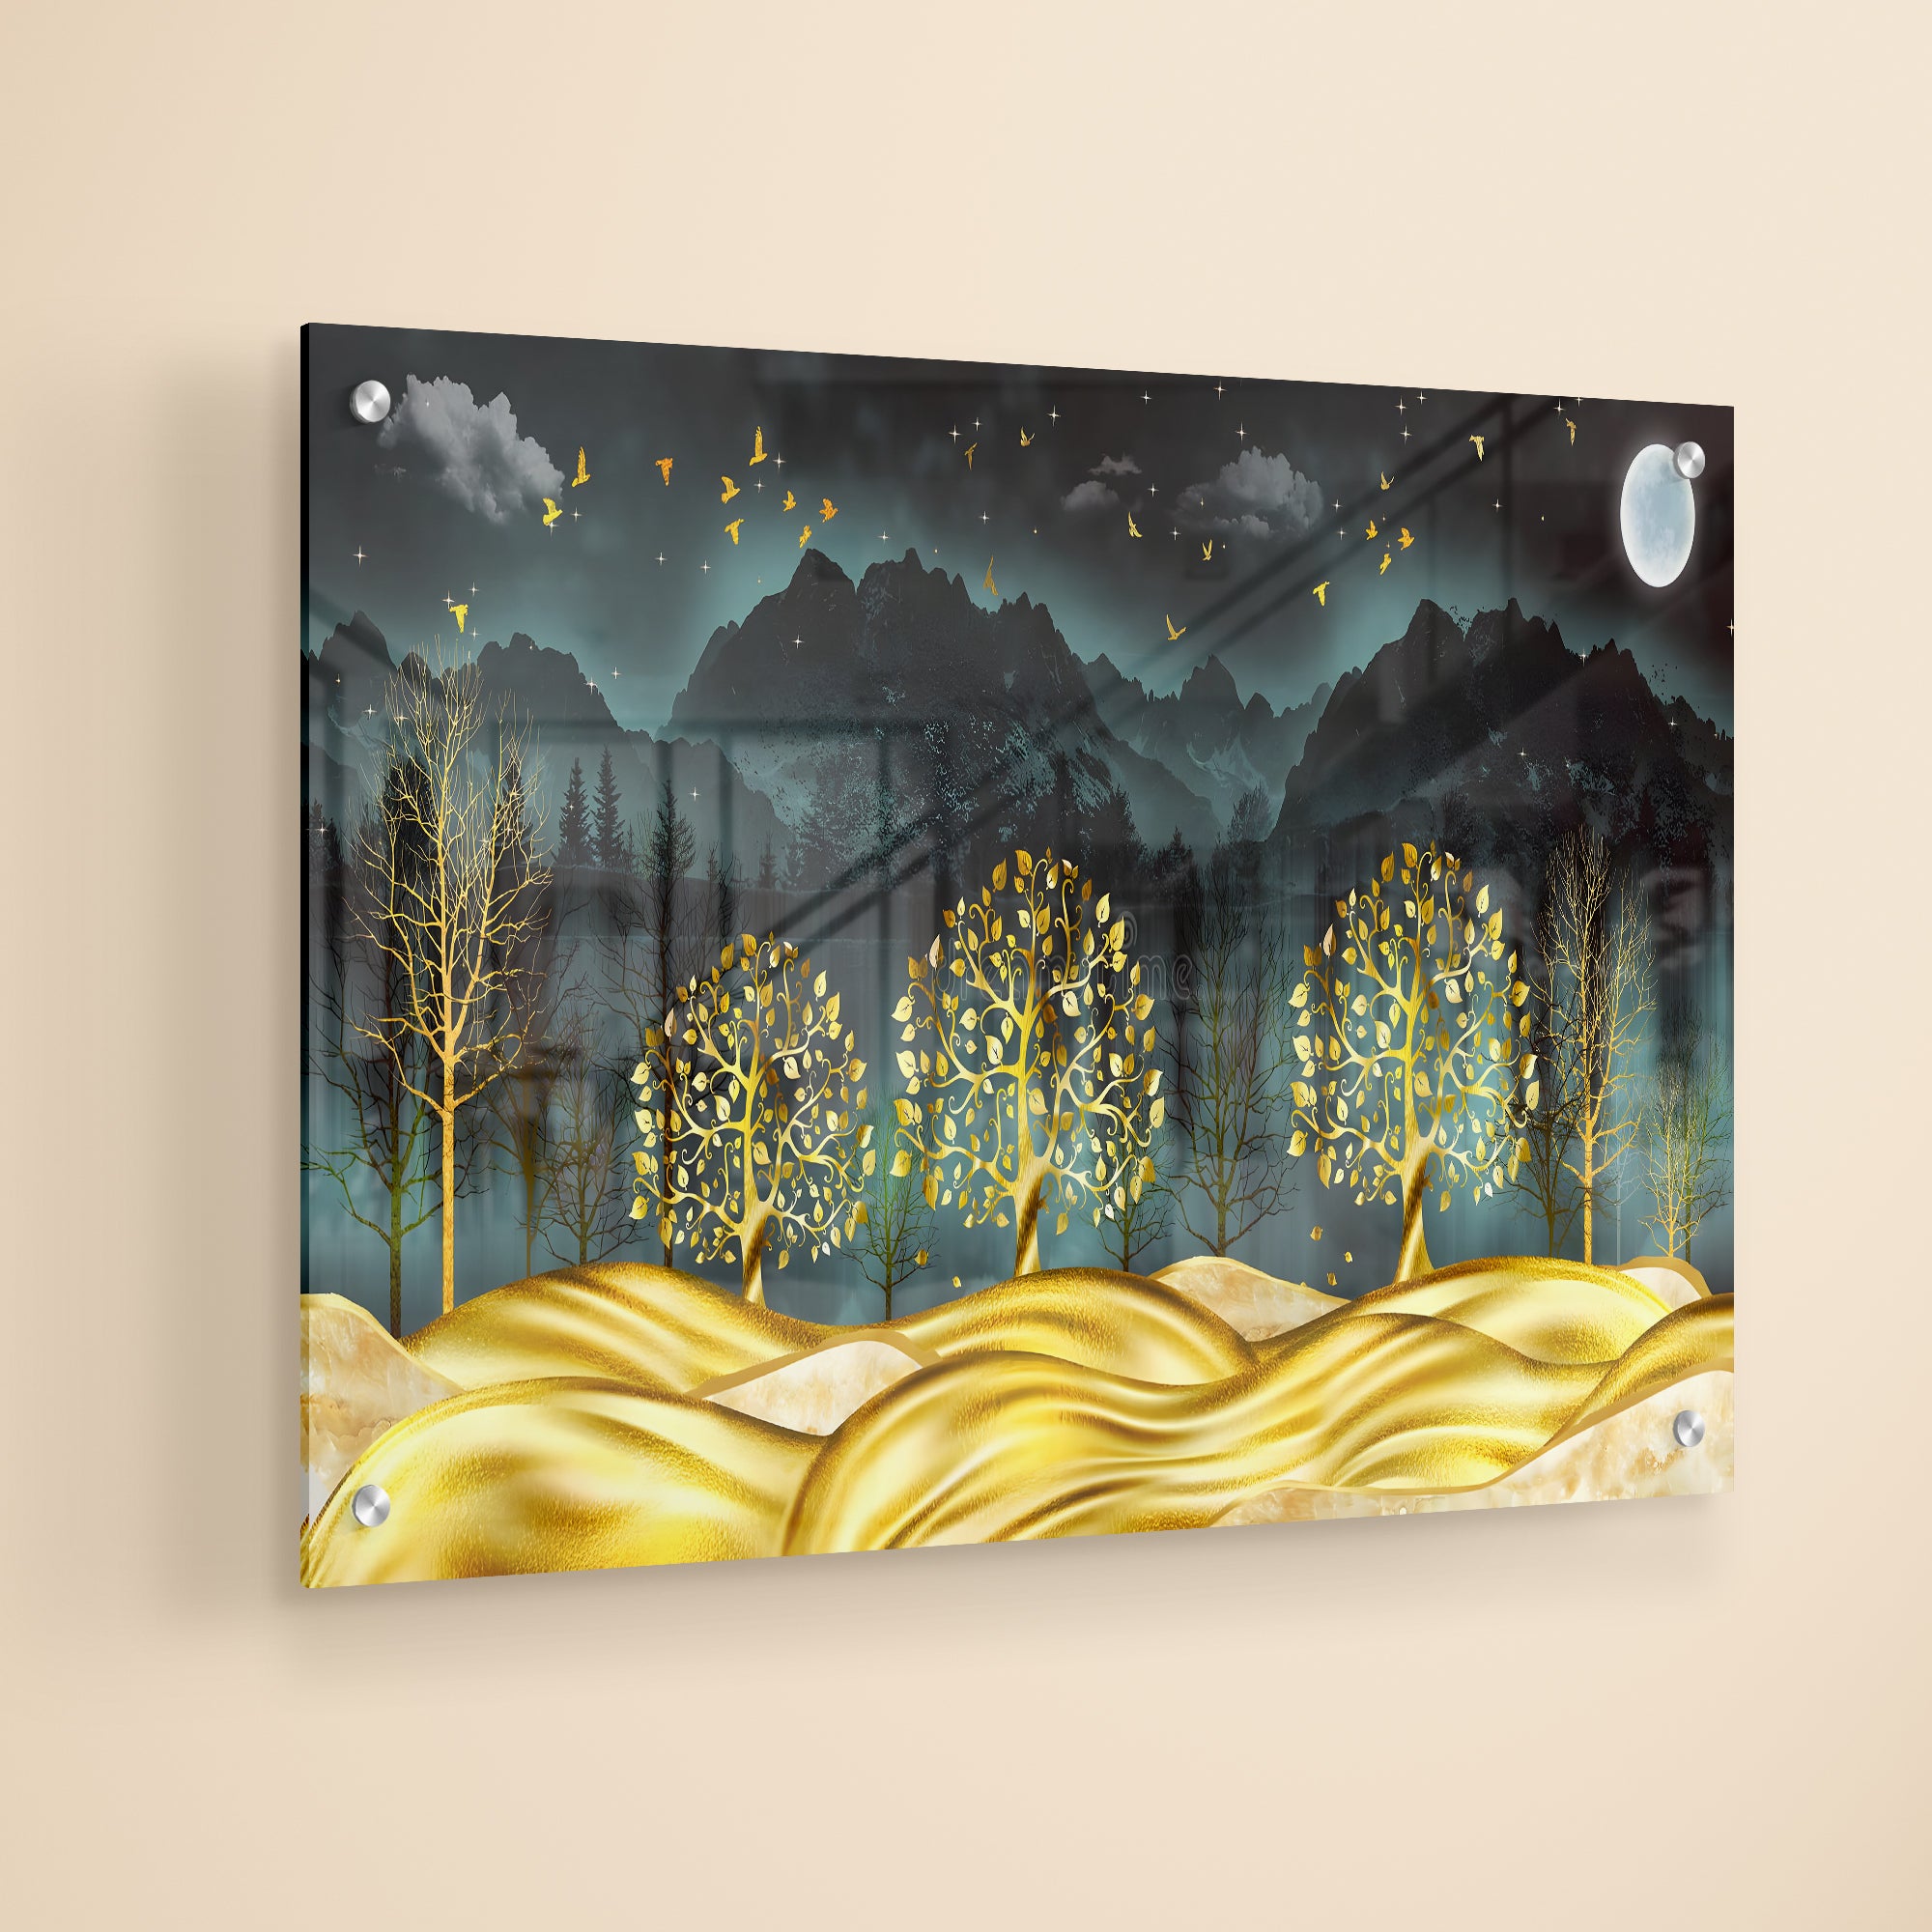 Golden Dreamscape Mesmerizing Nightscape Acrylic Painting